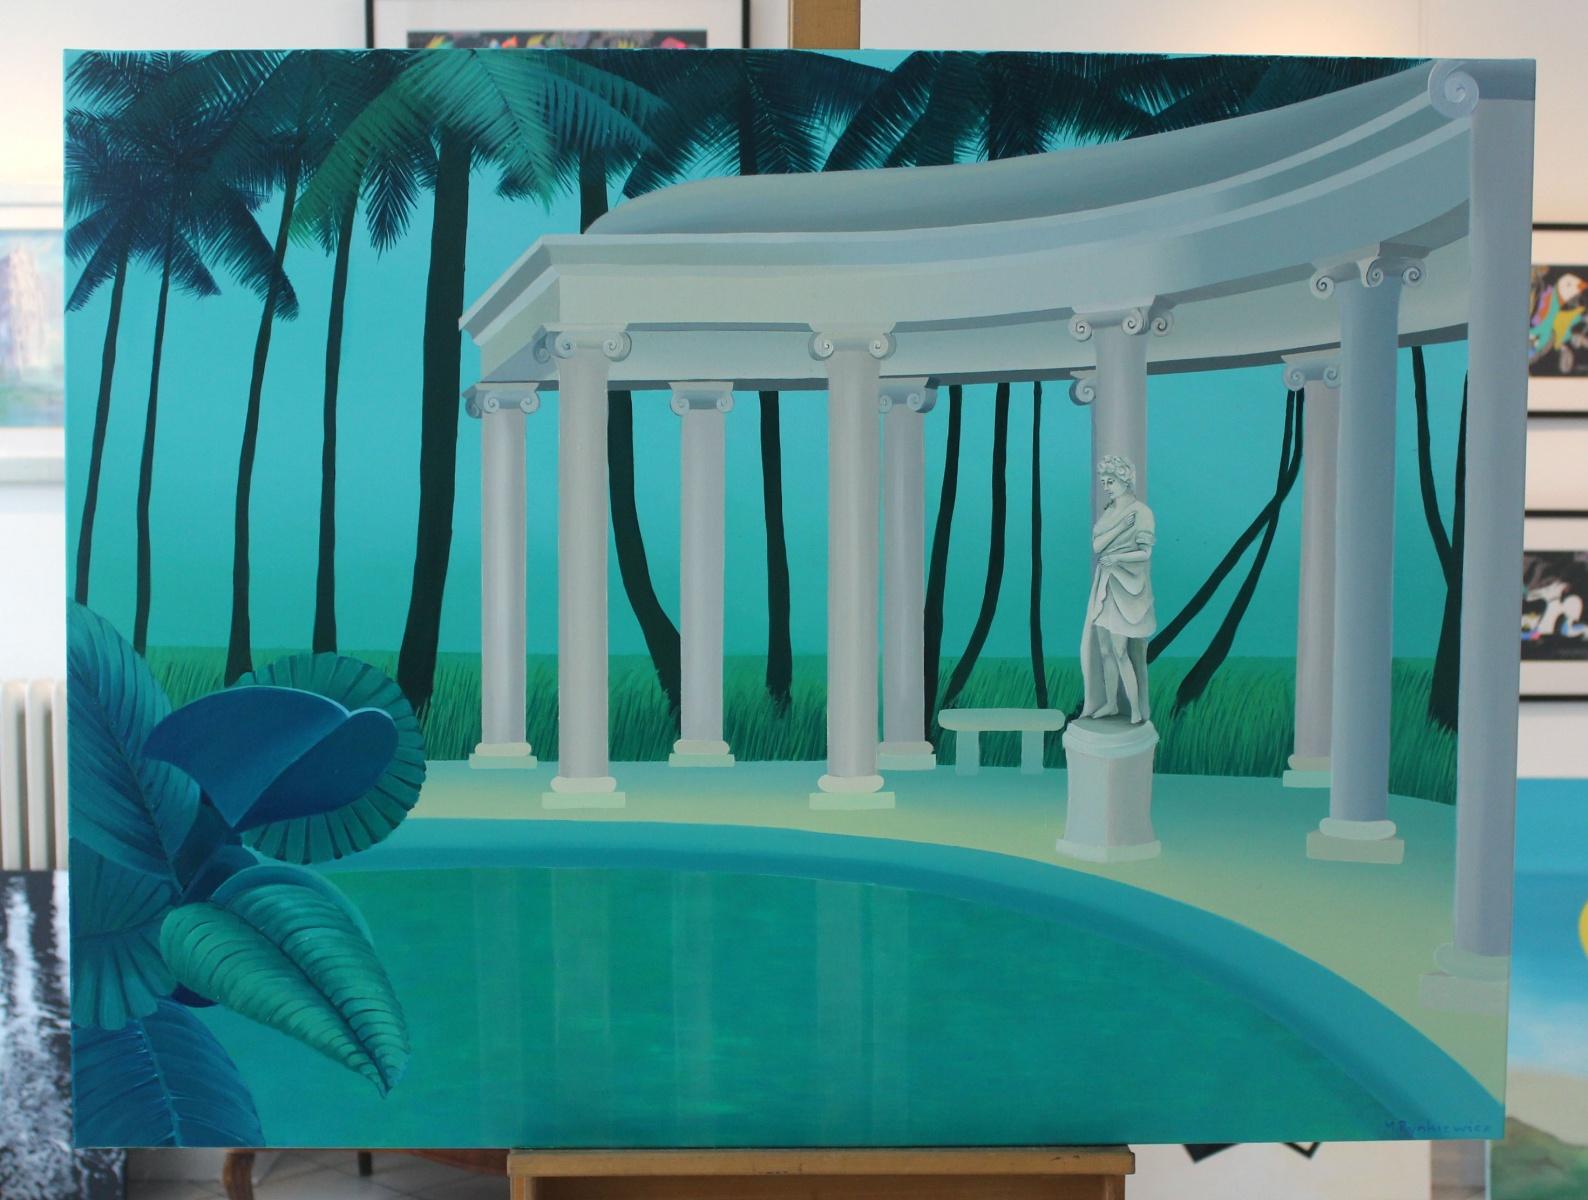 Colonnade in a palm forest - Figurative landscape acrylic painting, Green & blue - Painting by Marta Rynkiewicz